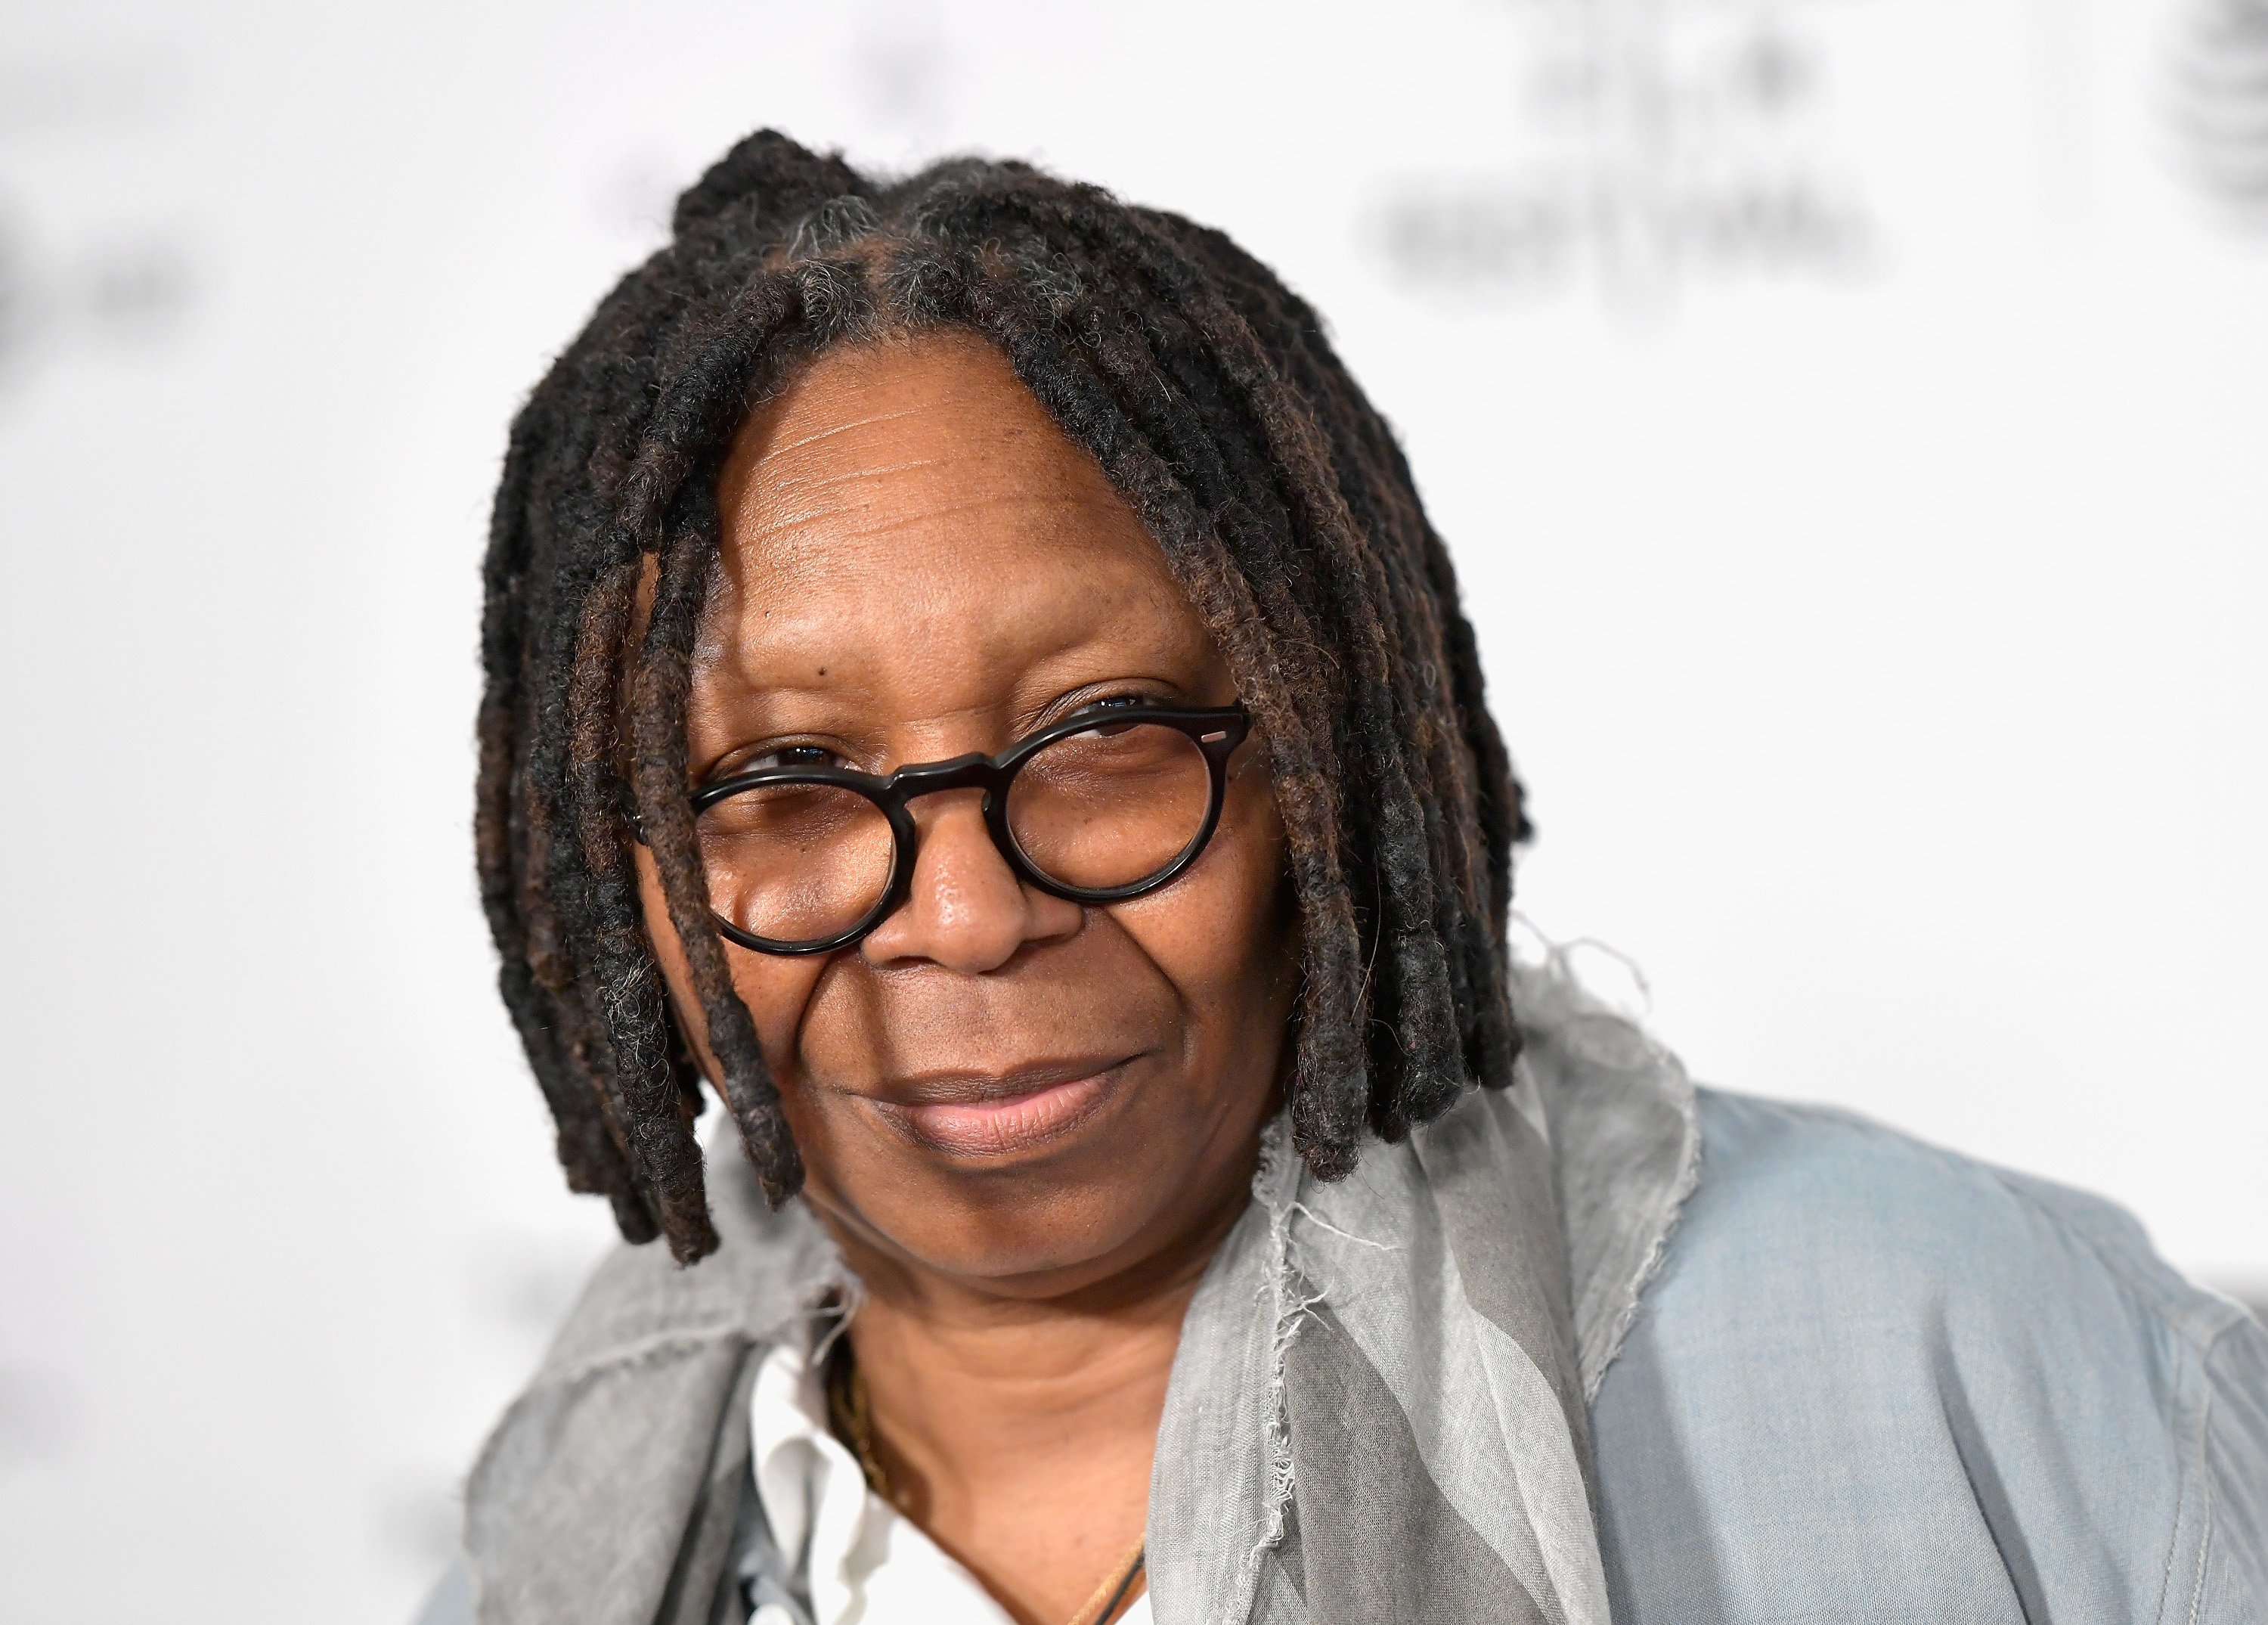 Whoopi Goldberg at the 2018 Tribeca Film Festival. | Photo: Getty Images